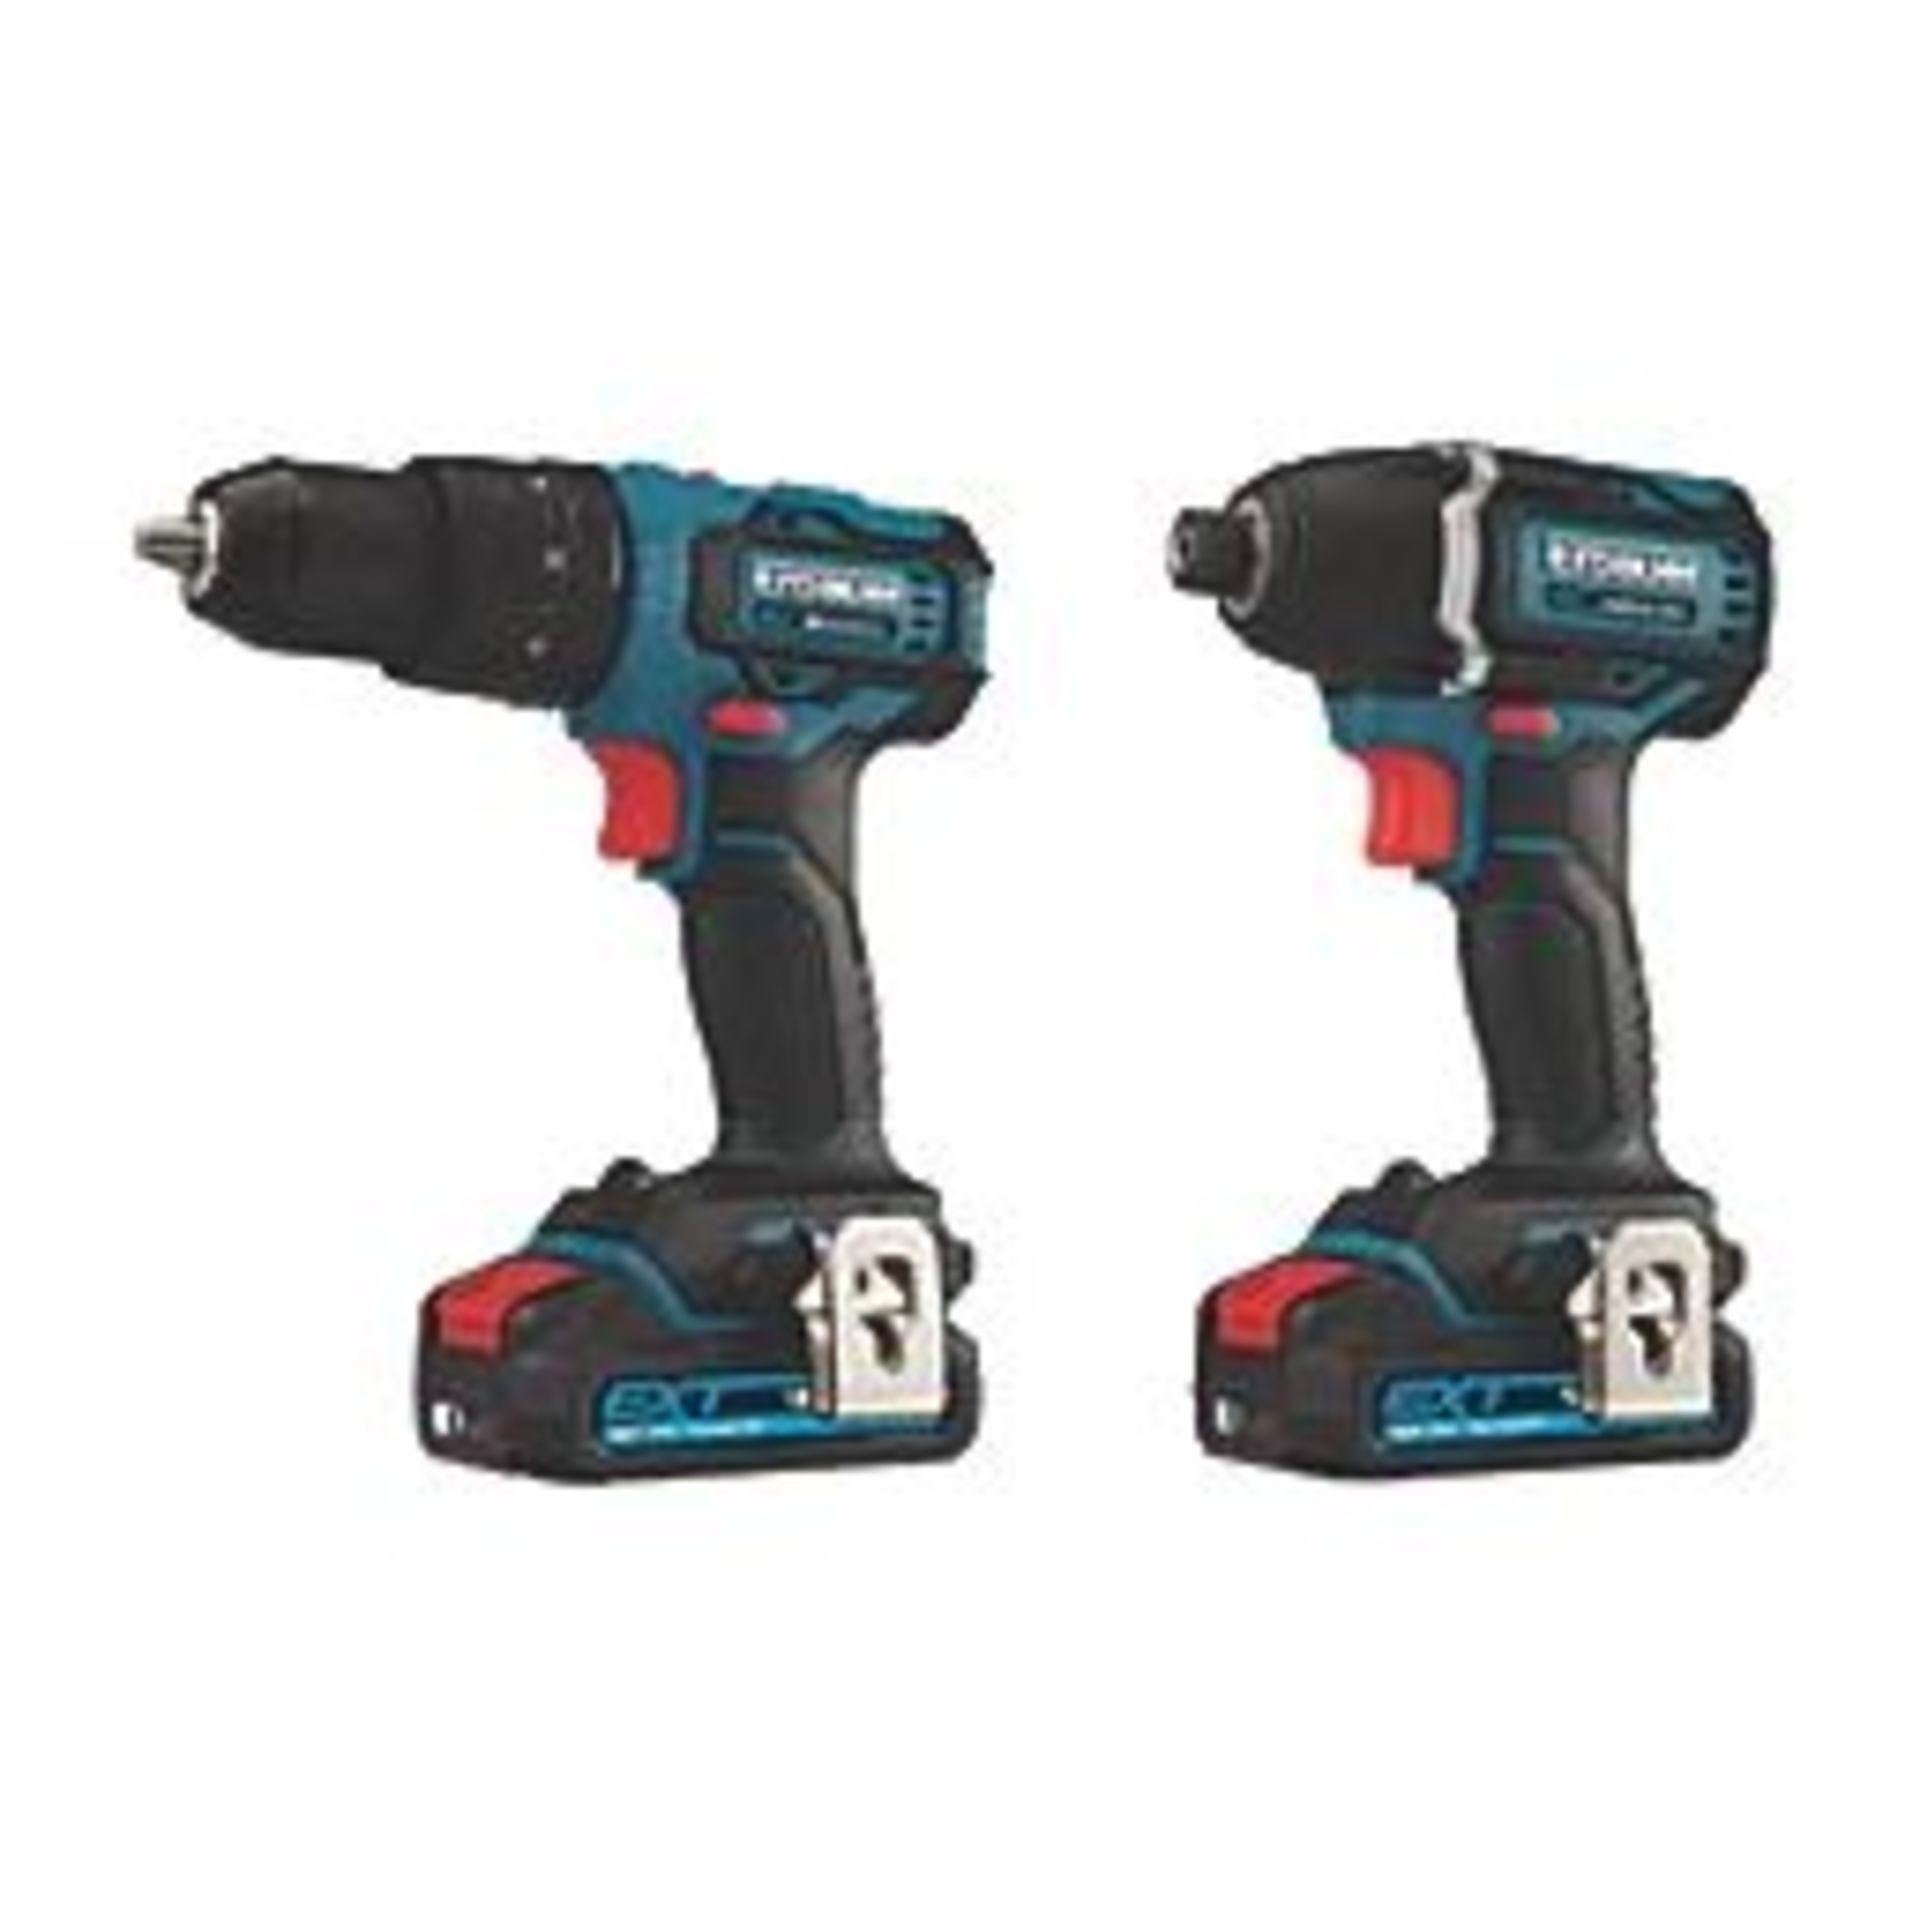 ERBAUER 18V 2 X 2.0AH LI-ION EXT BRUSHLESS CORDLESS TWIN PACK. -ER42. 3-in-1 multi-function combi